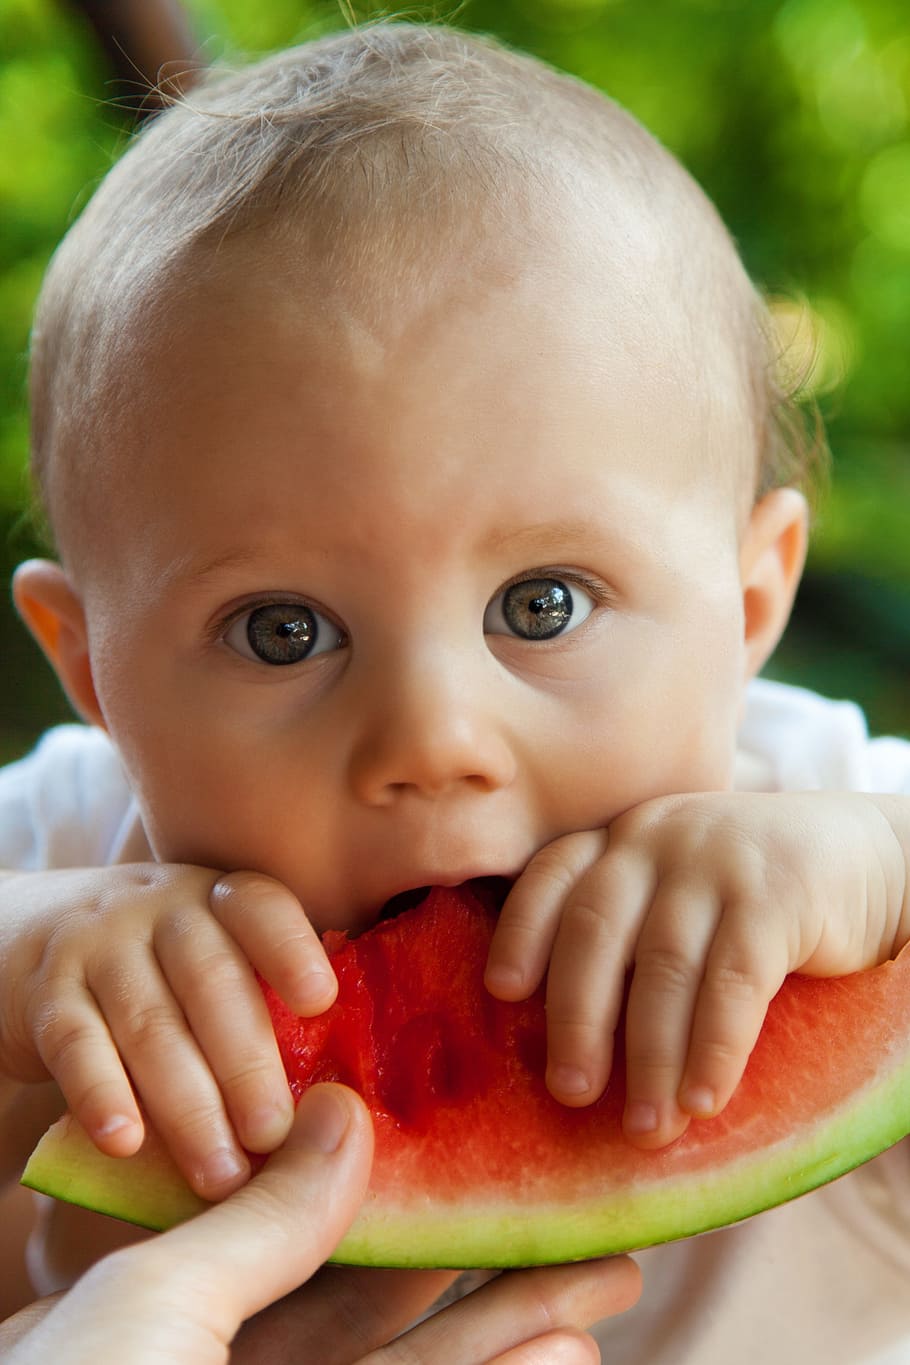 baby eating watermelon, baby, bite, boy, child, cute, eat, eating, food, fruit